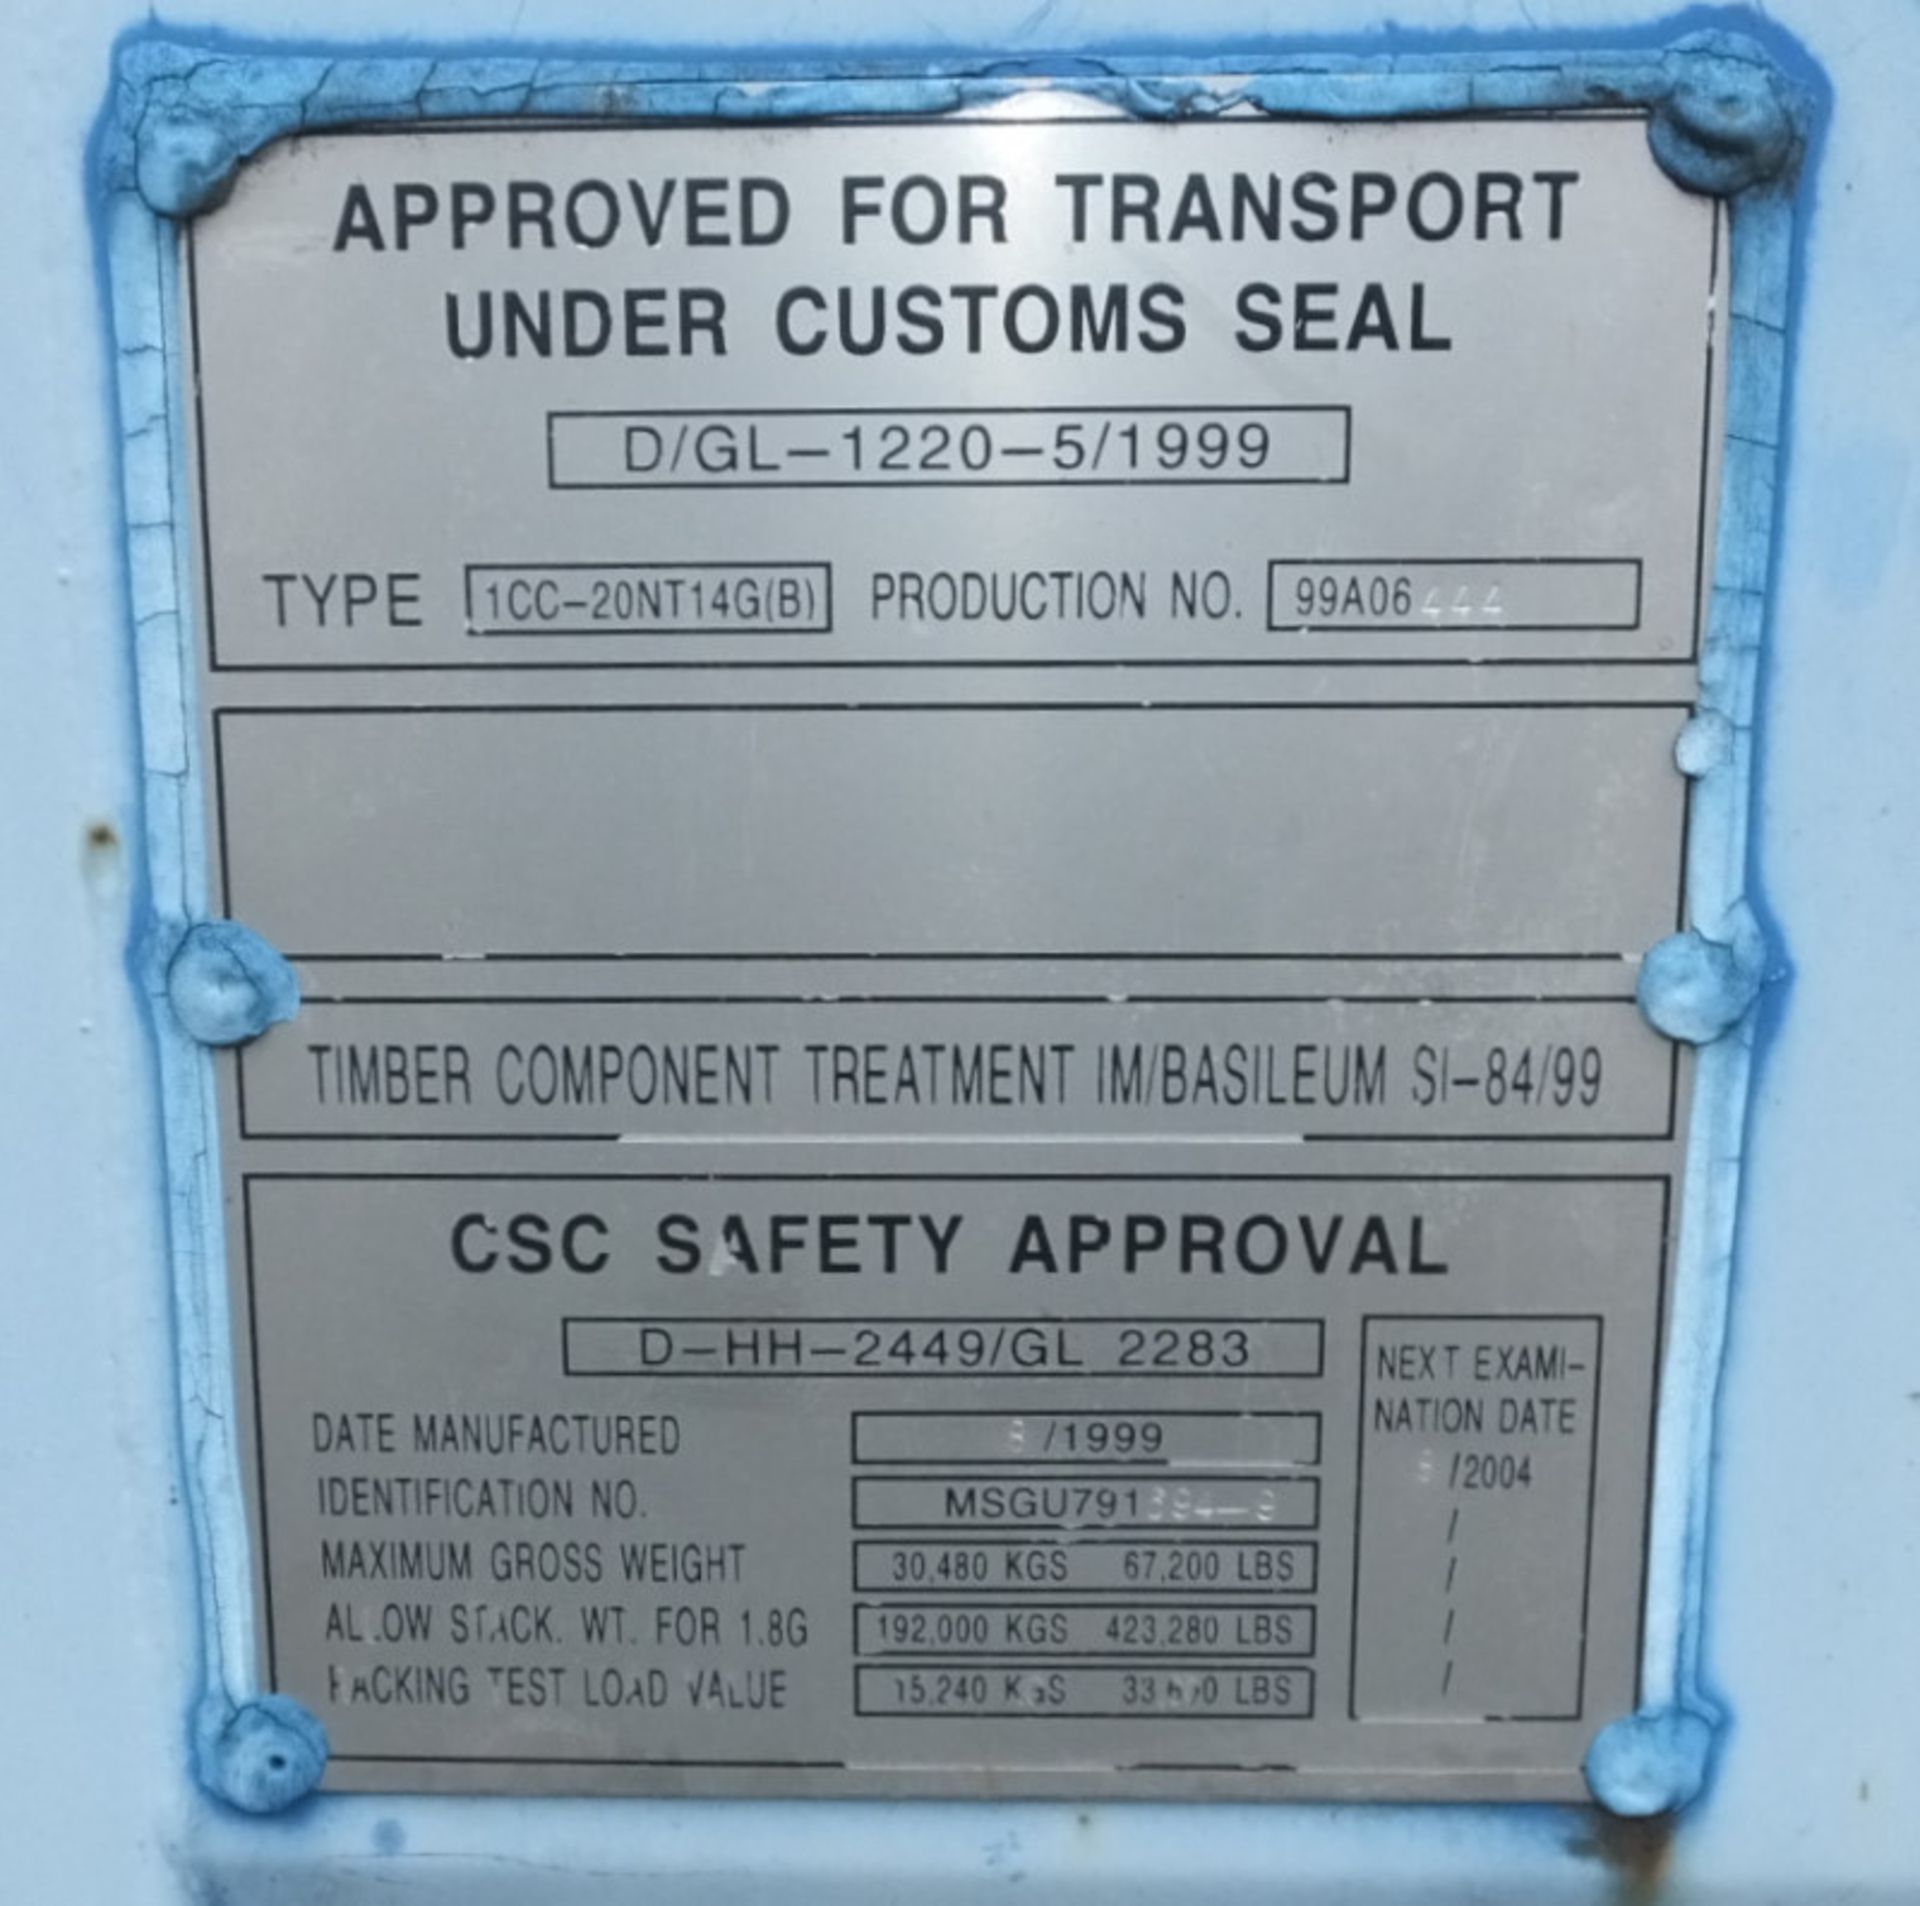 20ft ISO container - Type 1CC-20NT14G(B) - light blue - LOCATED AT OUR CROFT SITE - Image 12 of 12